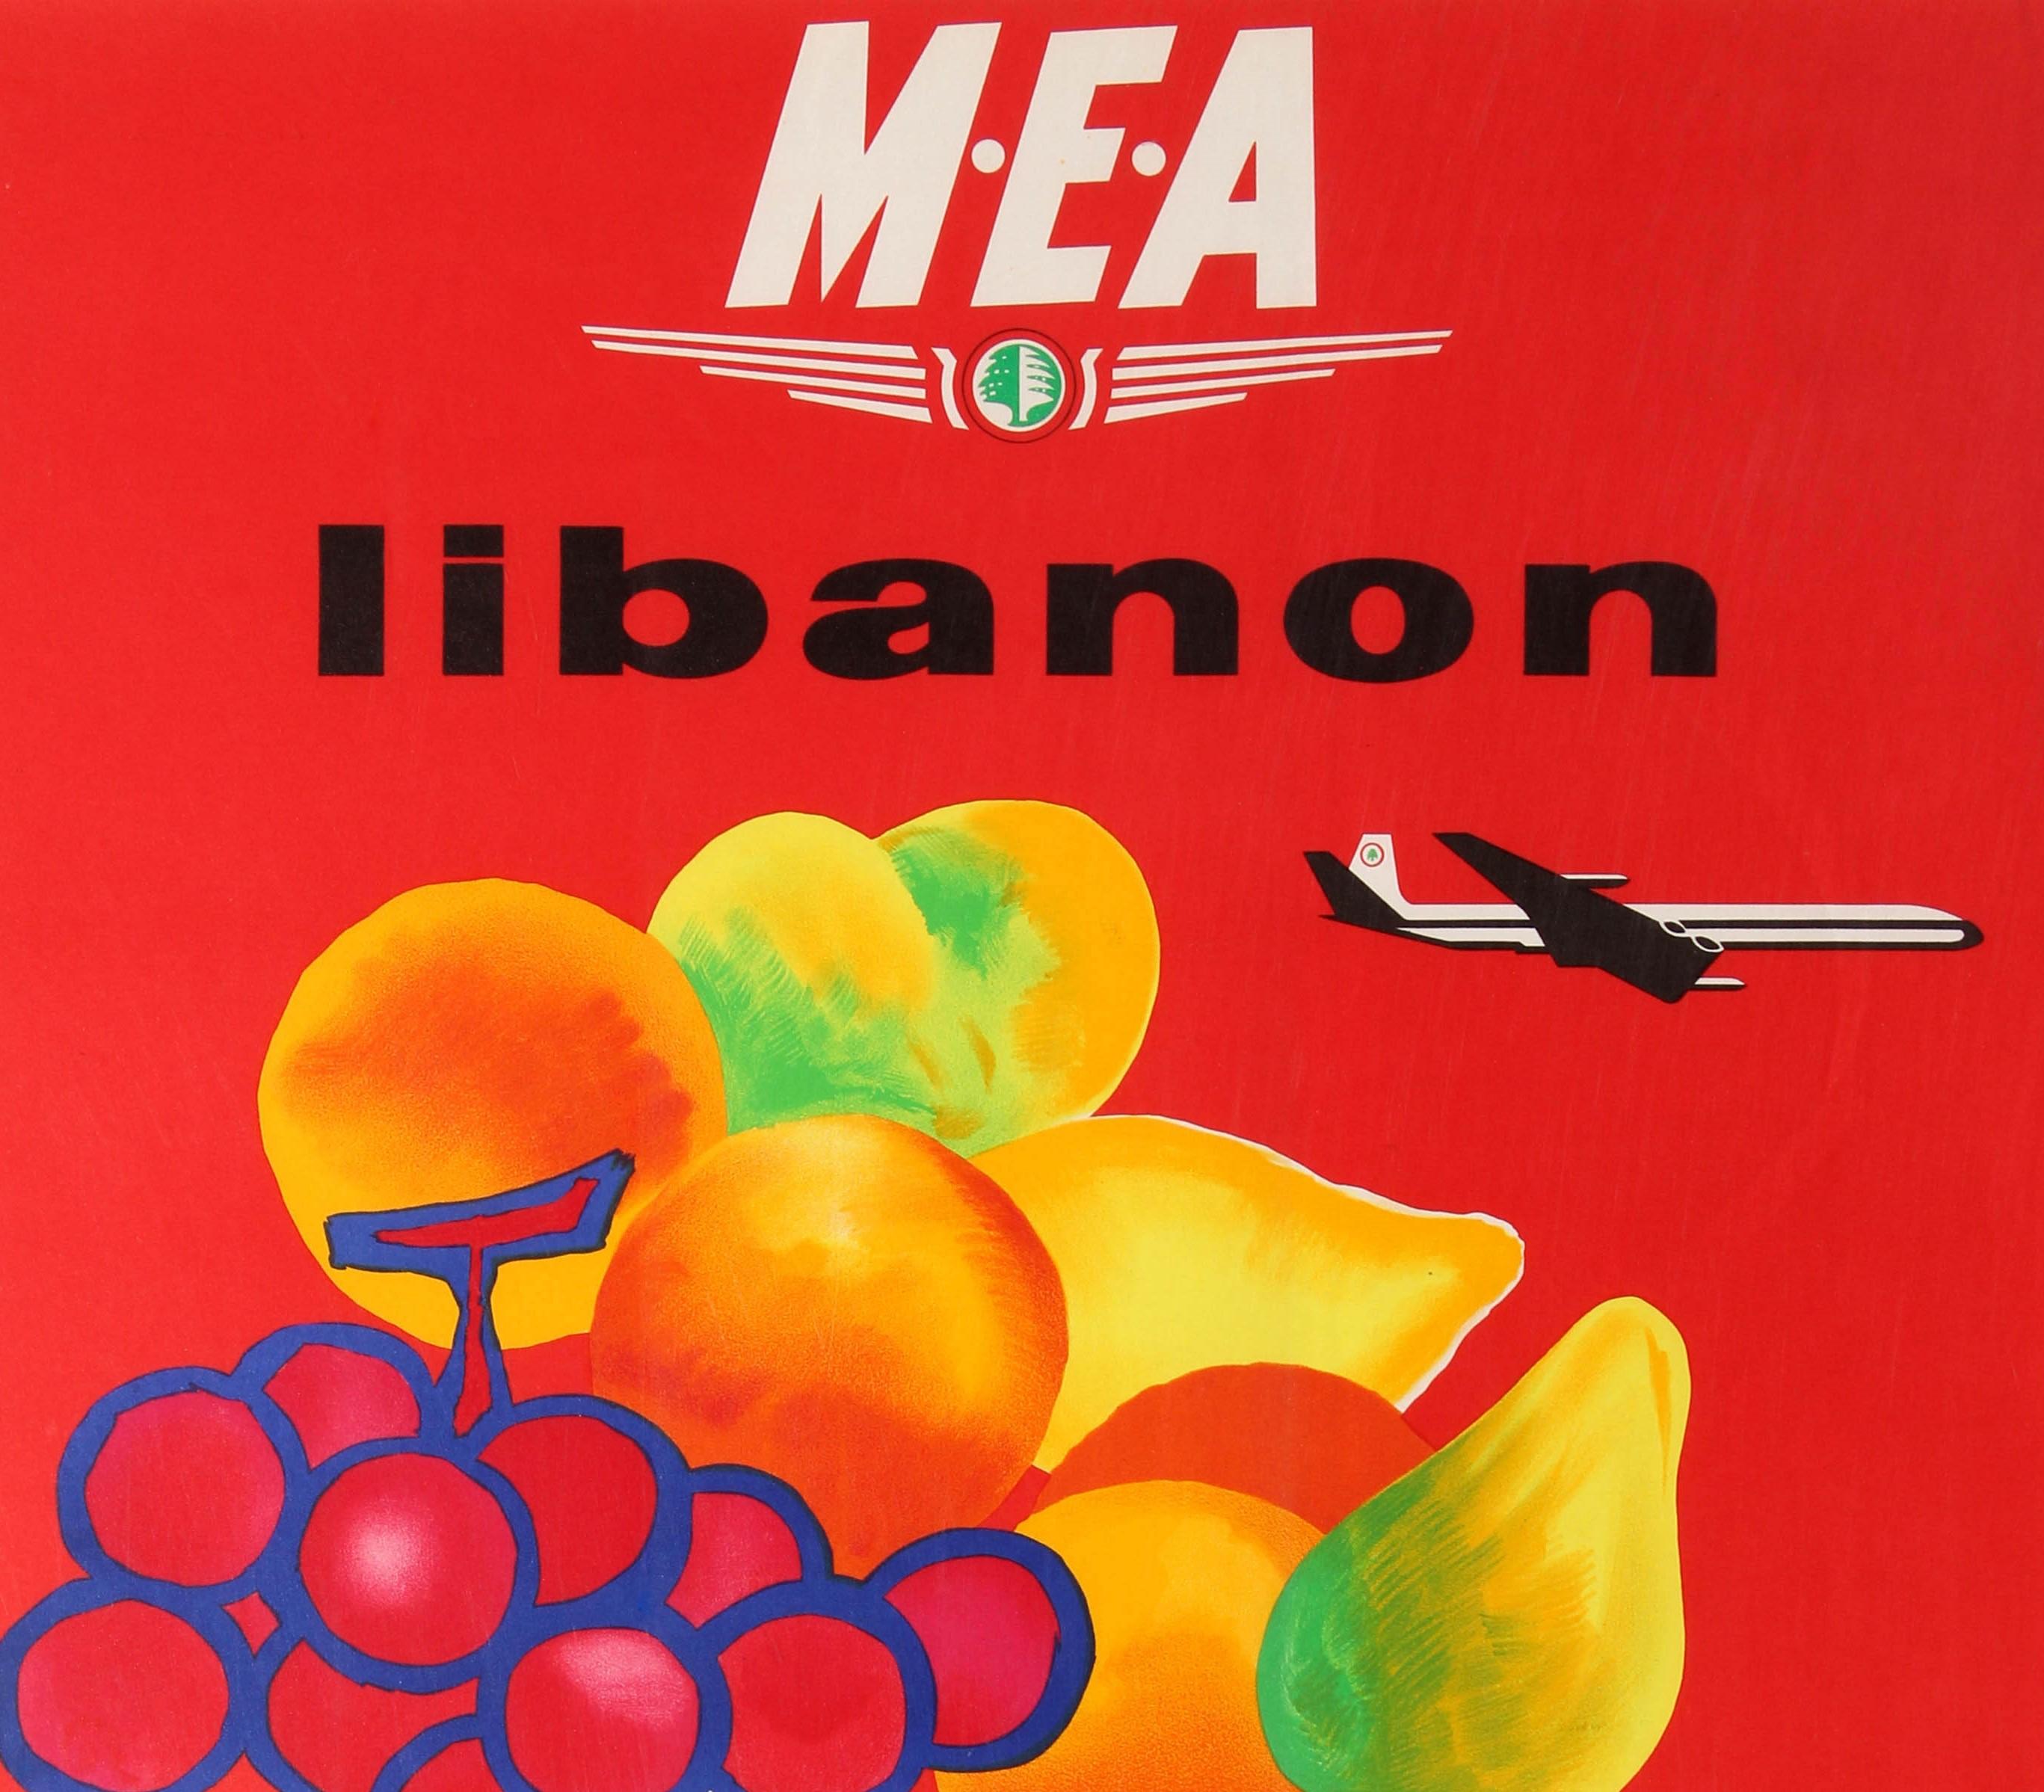 Original vintage travel advertising poster published by the Middle East Airlines (MEA), a British Overseas Airways Corporation BOAC associate to promote its flights to Lebanon / Libanon featuring a bold and colourful design by the French painter and